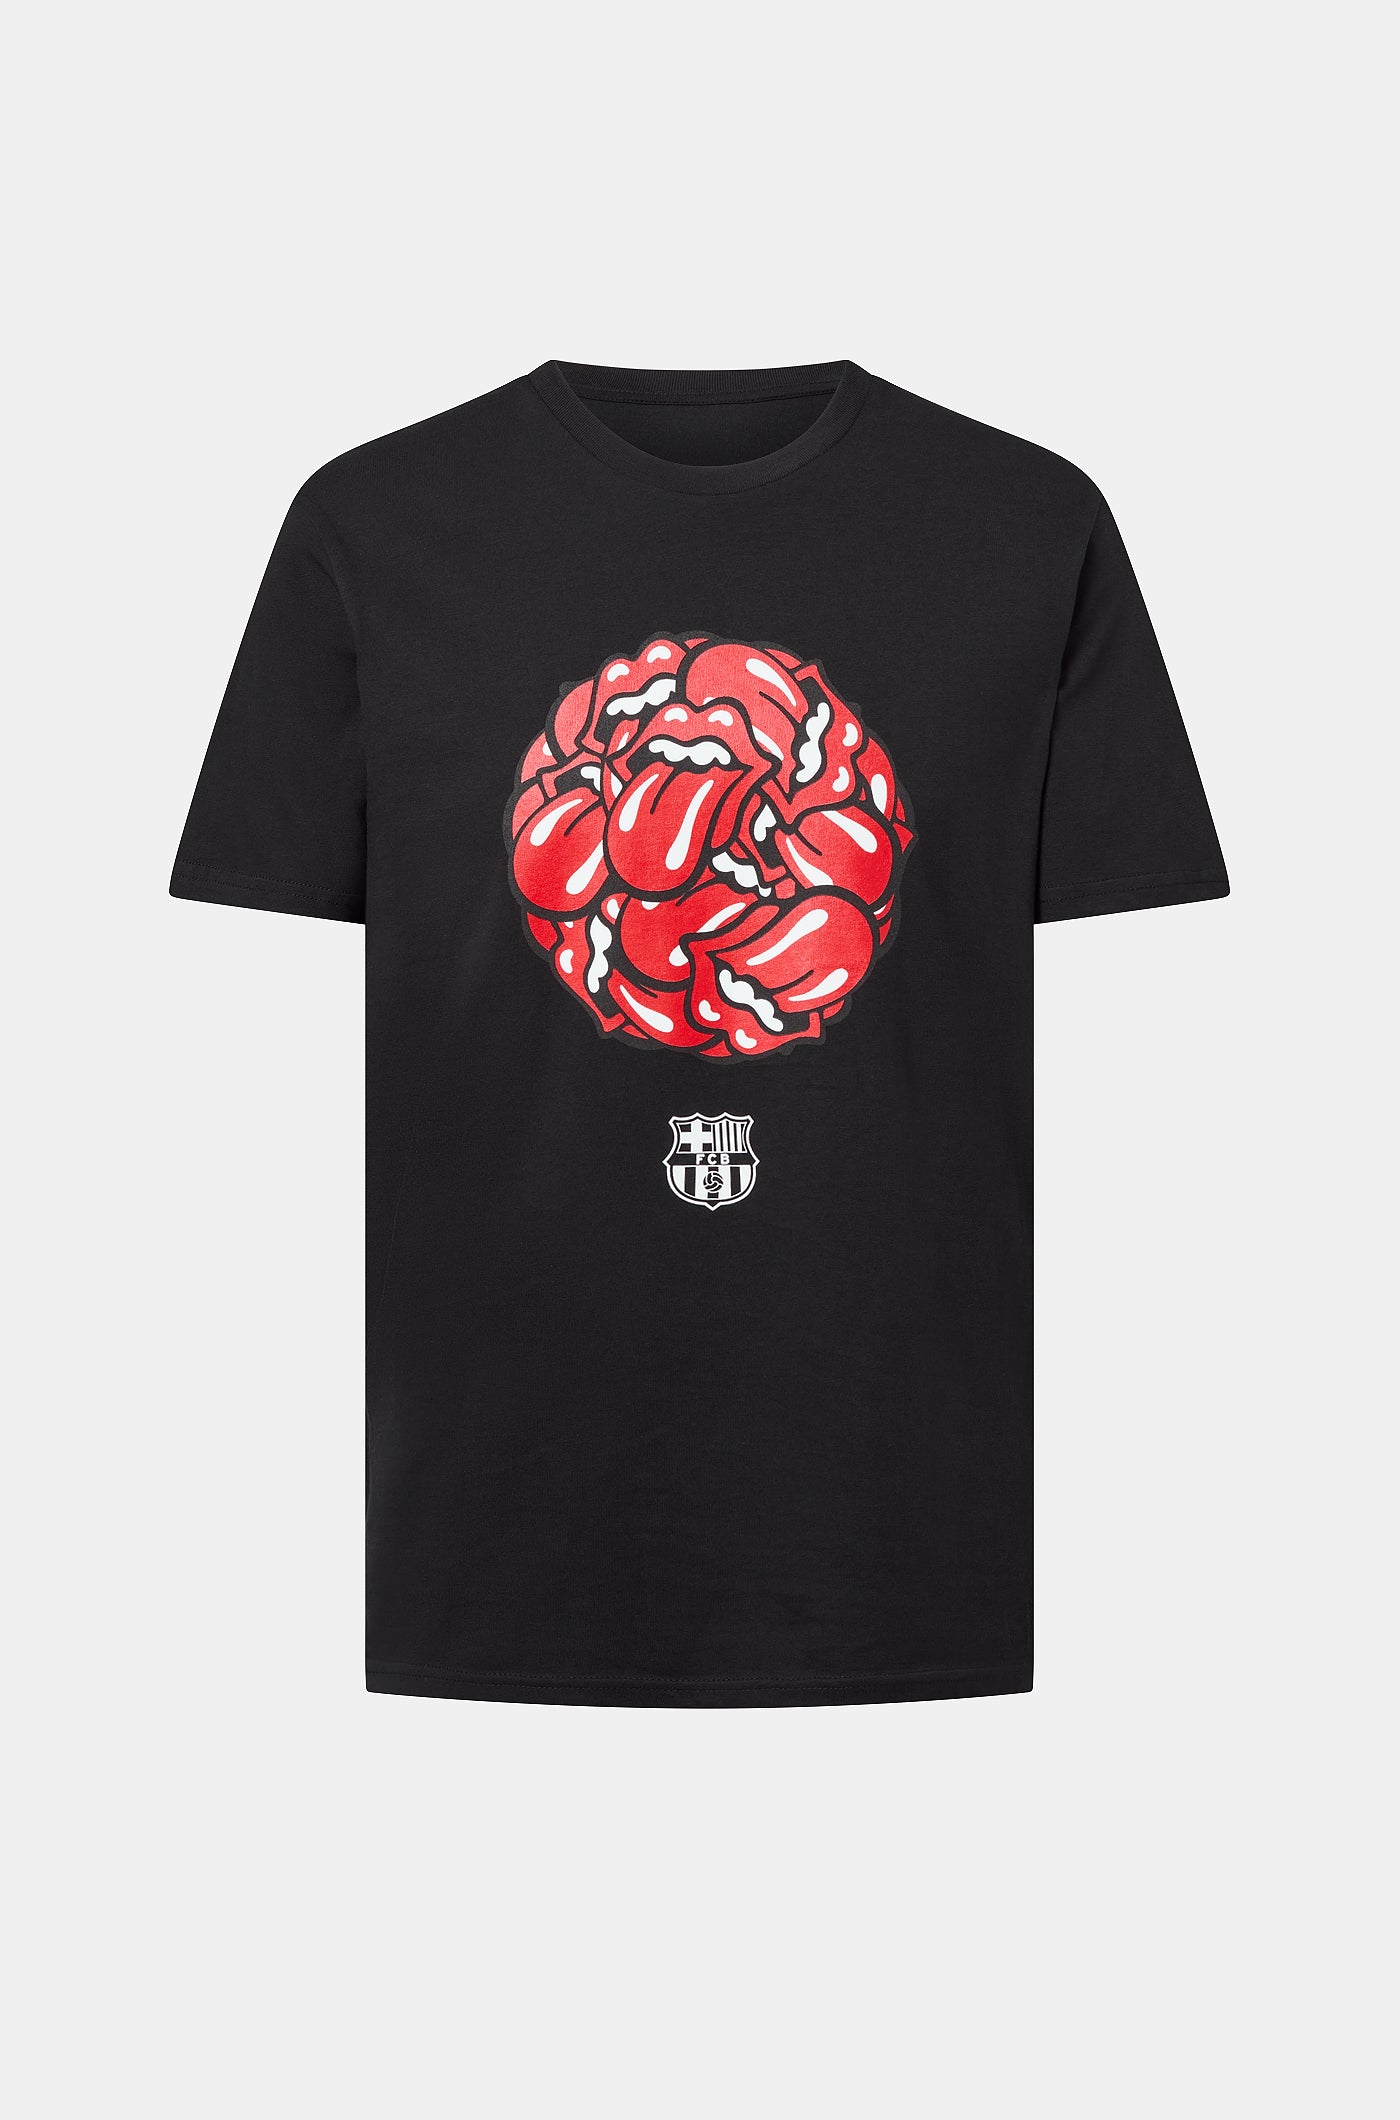 Barça x Rolling Stones limited edition t-shirt